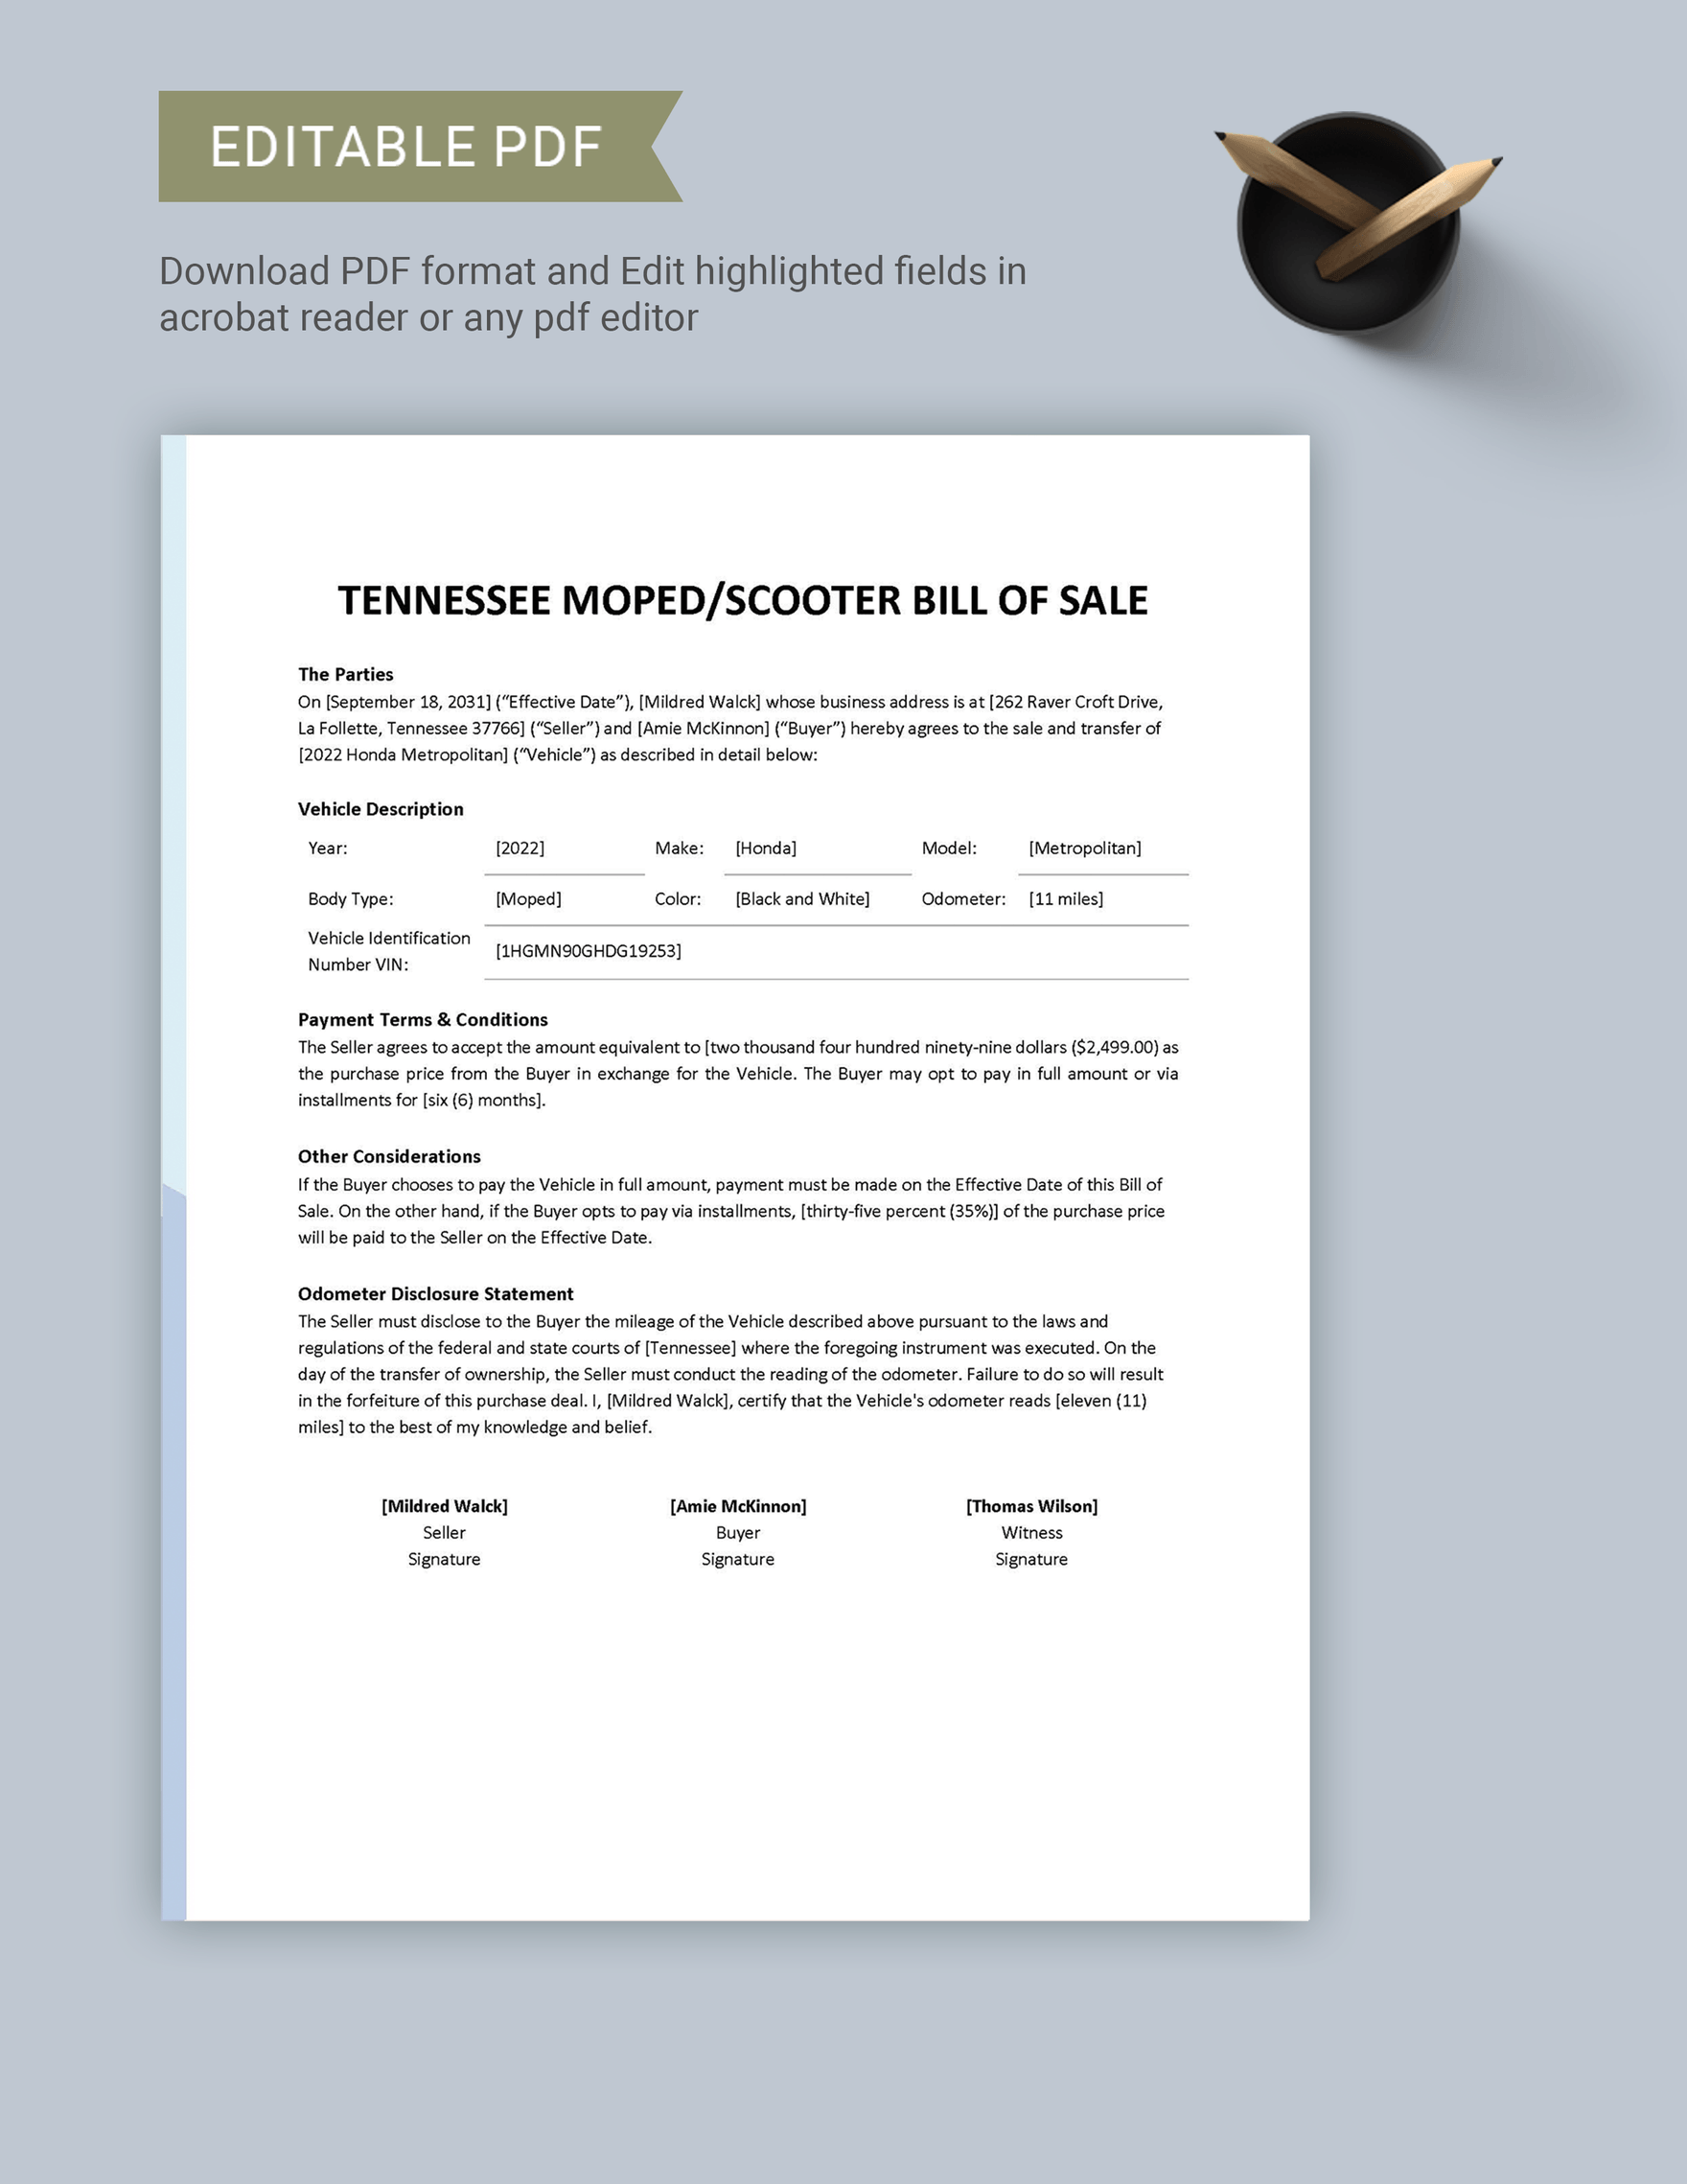 Tennessee Moped / Scooter Bill of Sale Template